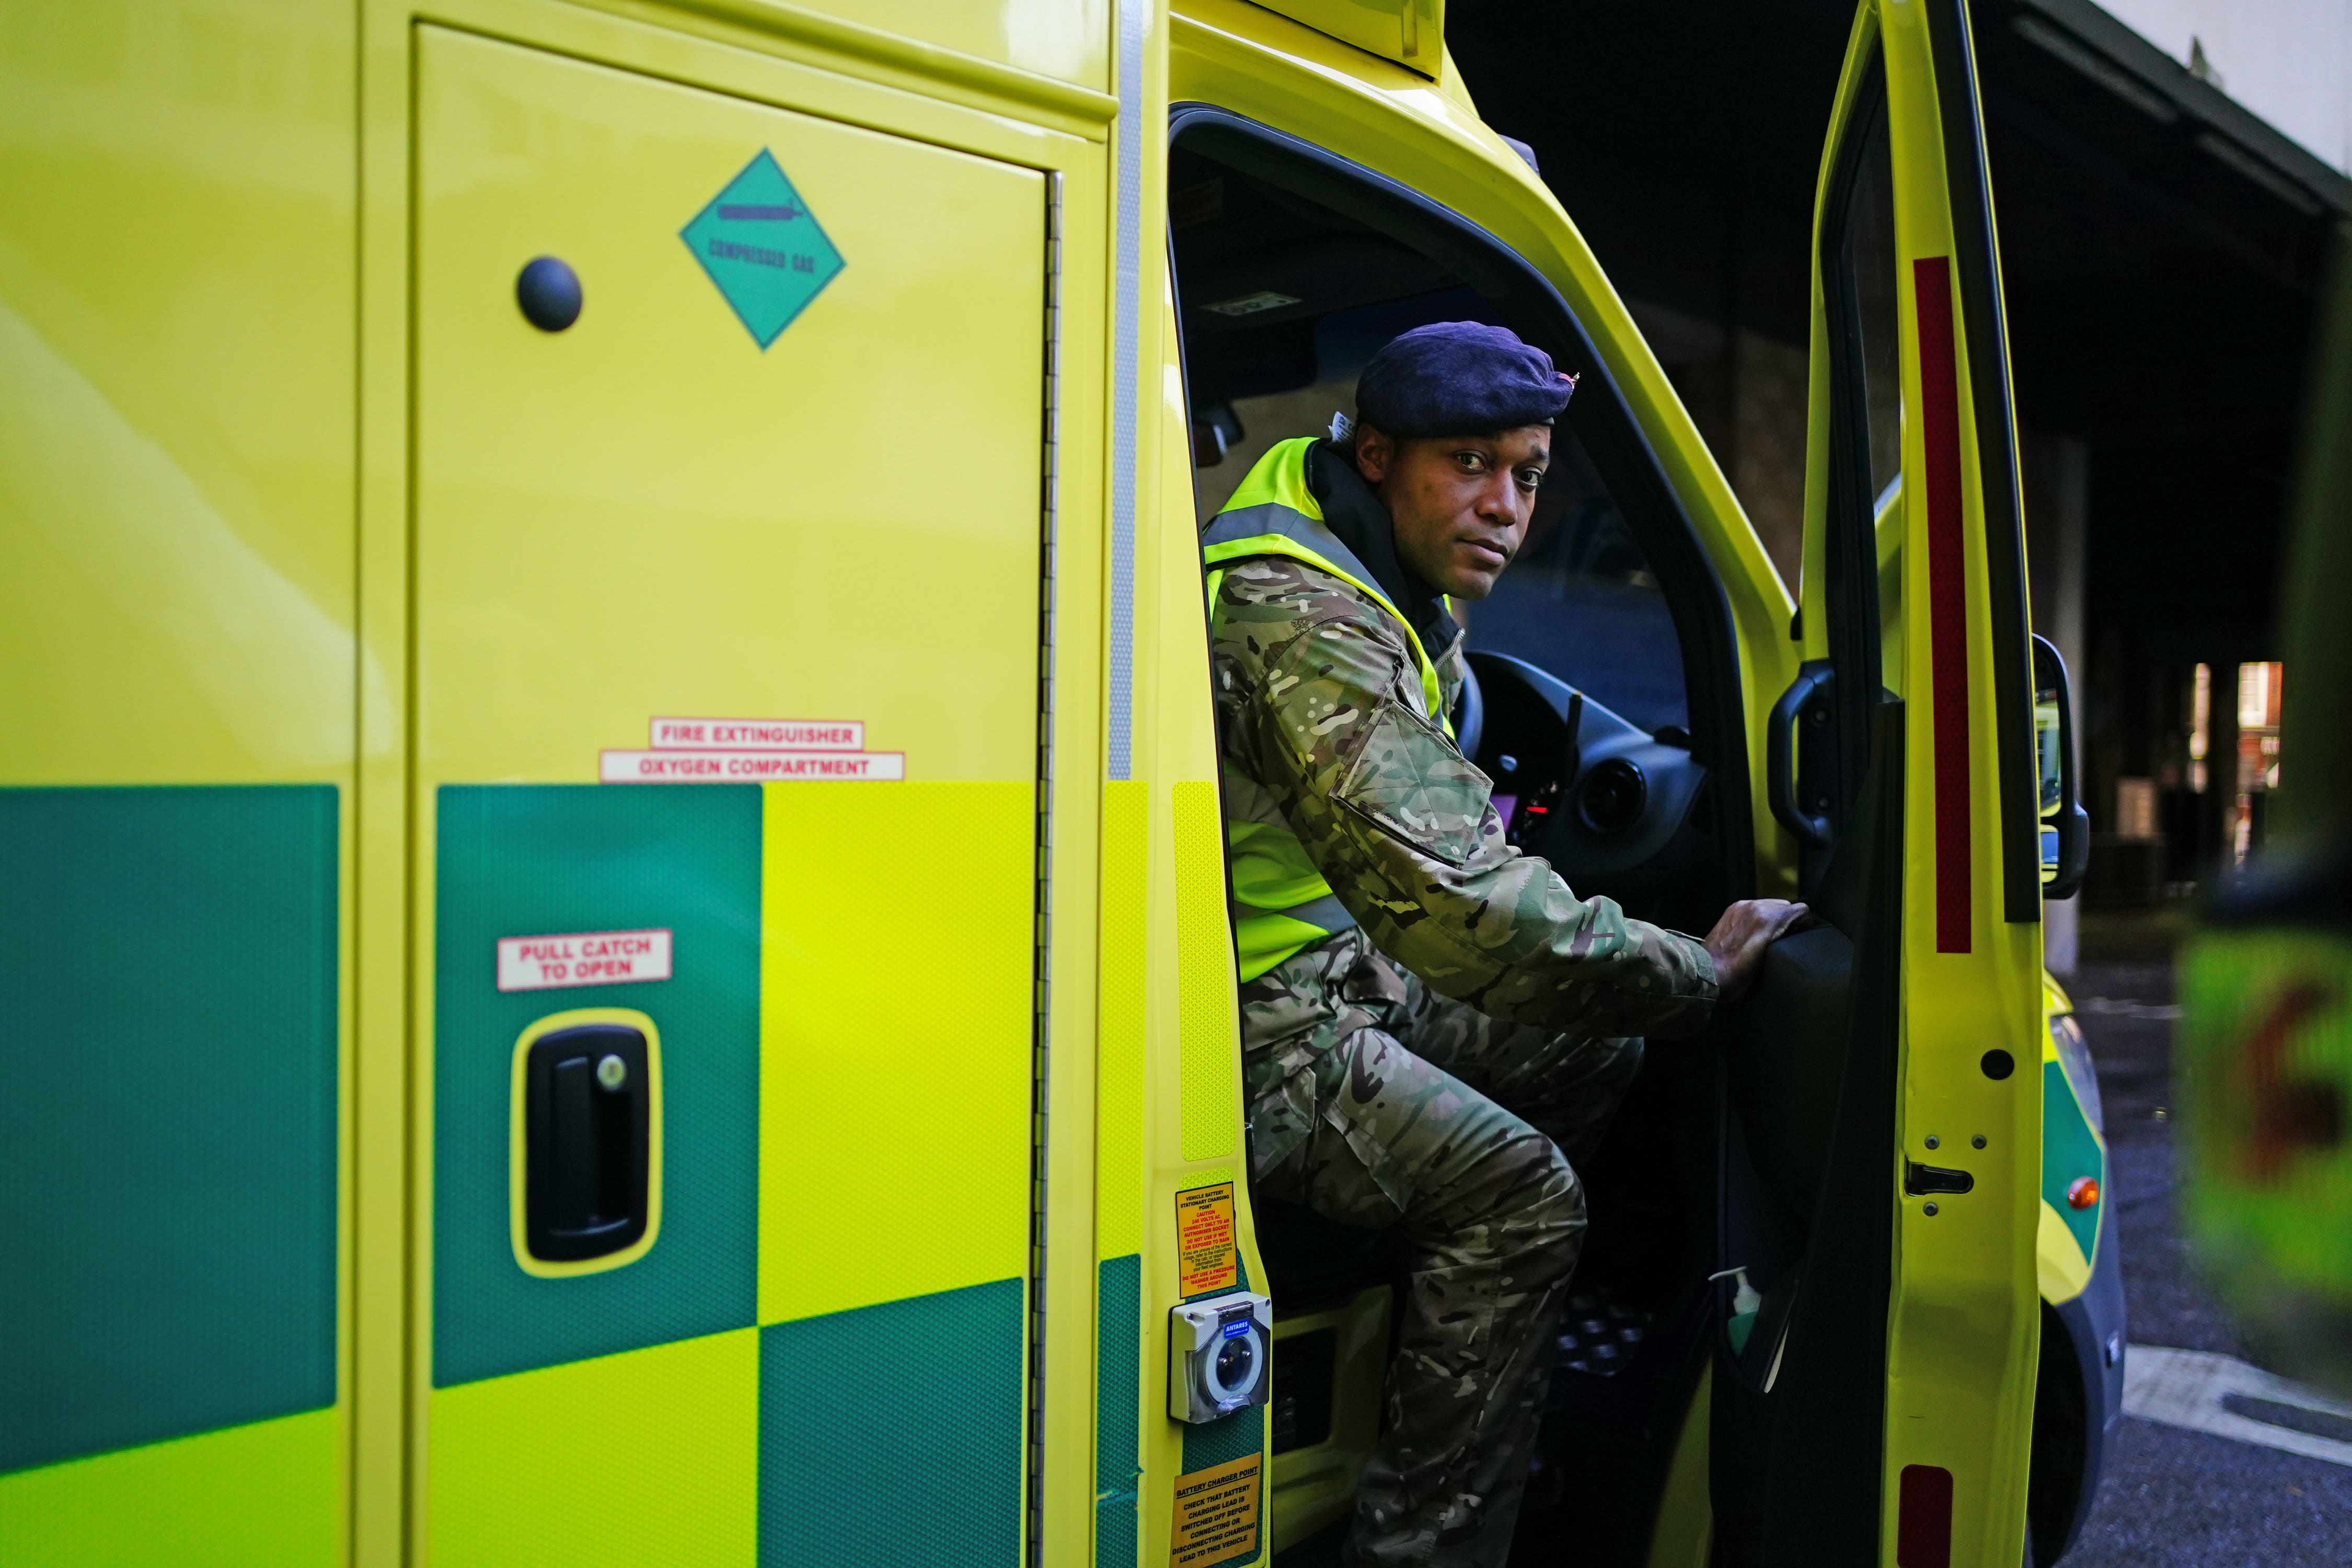 Military personnel from the Household Division take part in ambulance driver training at Wellington Barracks in London, as they prepare to provide cover for ambulance workers on December 21 and 28 when members of the Unison, GMB and Unite unions take industrial action over pay. Paramedics, ambulance technicians and call handlers will walk out in England and Wales on Wednesday in action that will affect non-life threatening calls. Picture date: Tuesday December 20, 2022.